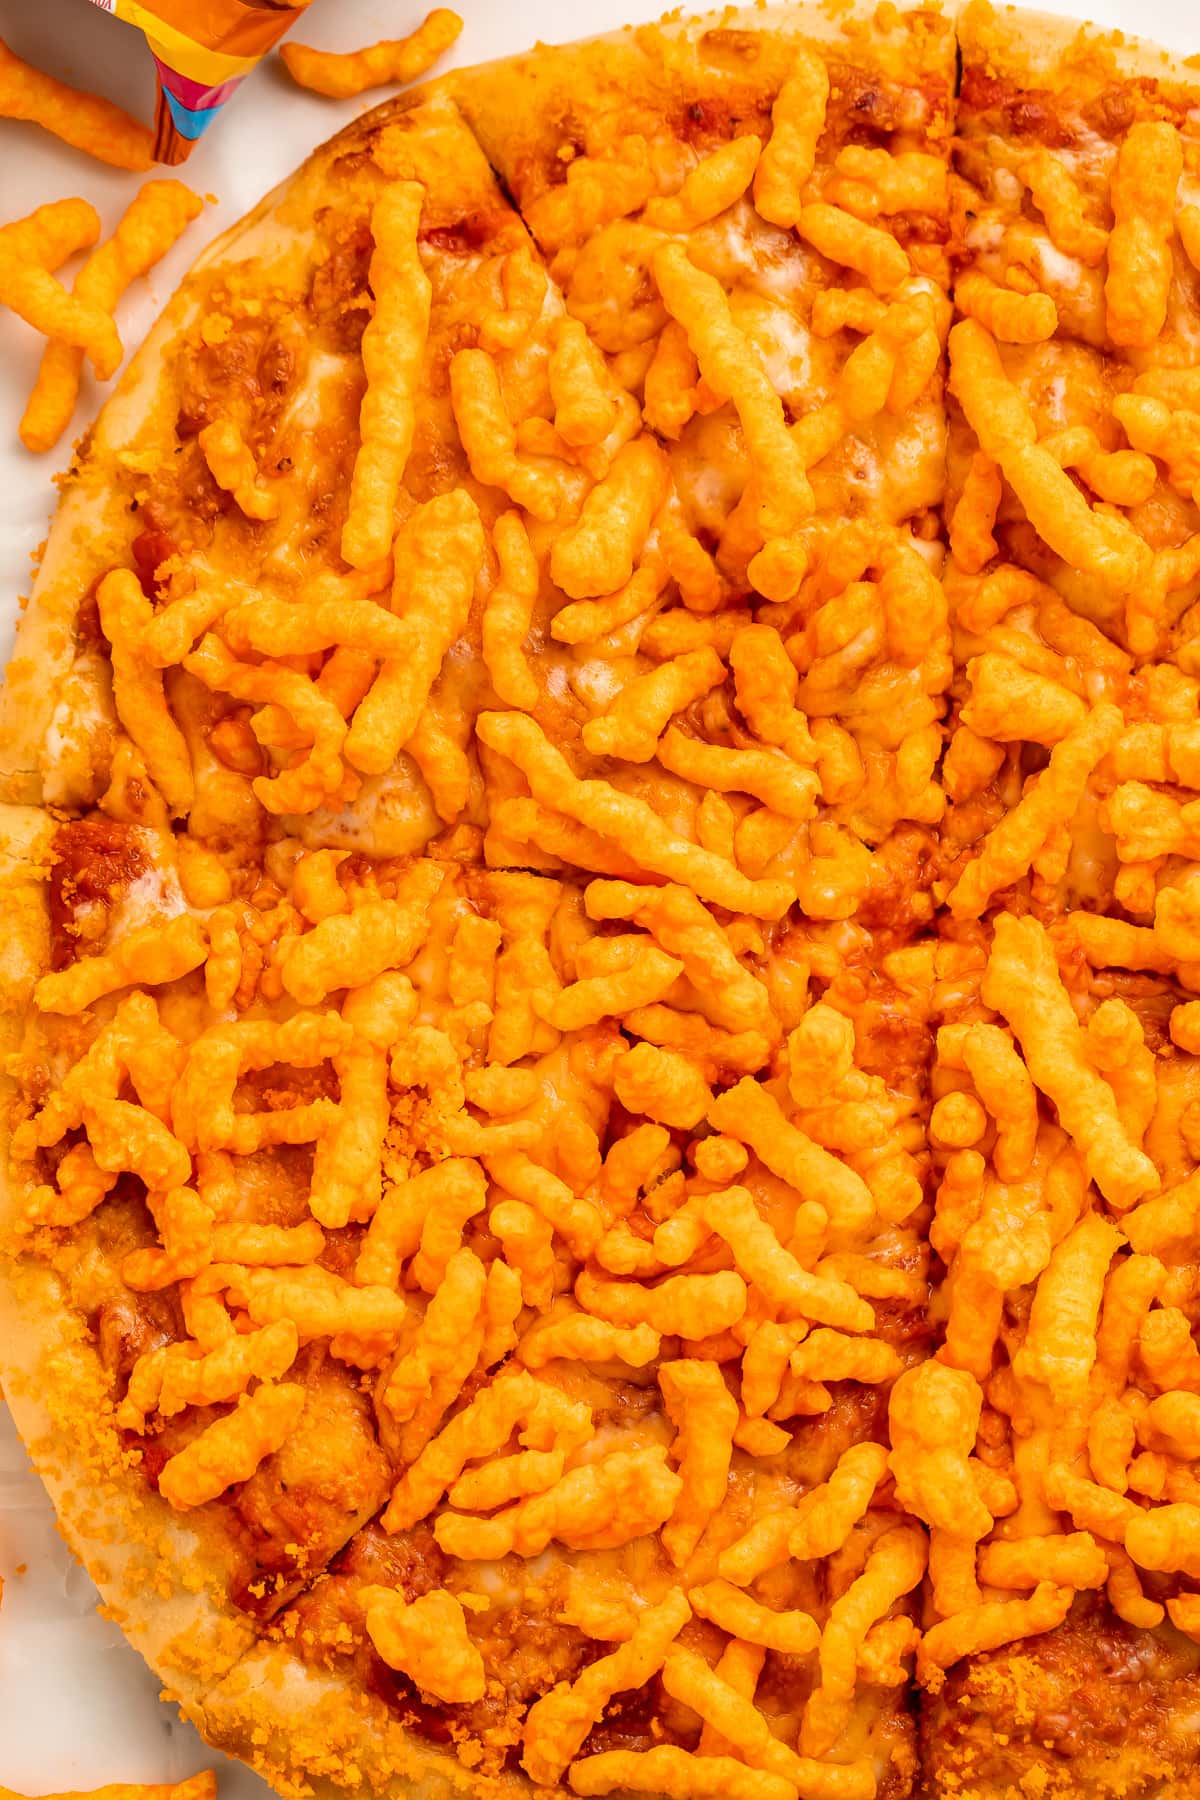 A large round cheese pizza topped with bright orange crunchy Cheetos, cut into triangle-shaped slices but still together as a whole pizza.